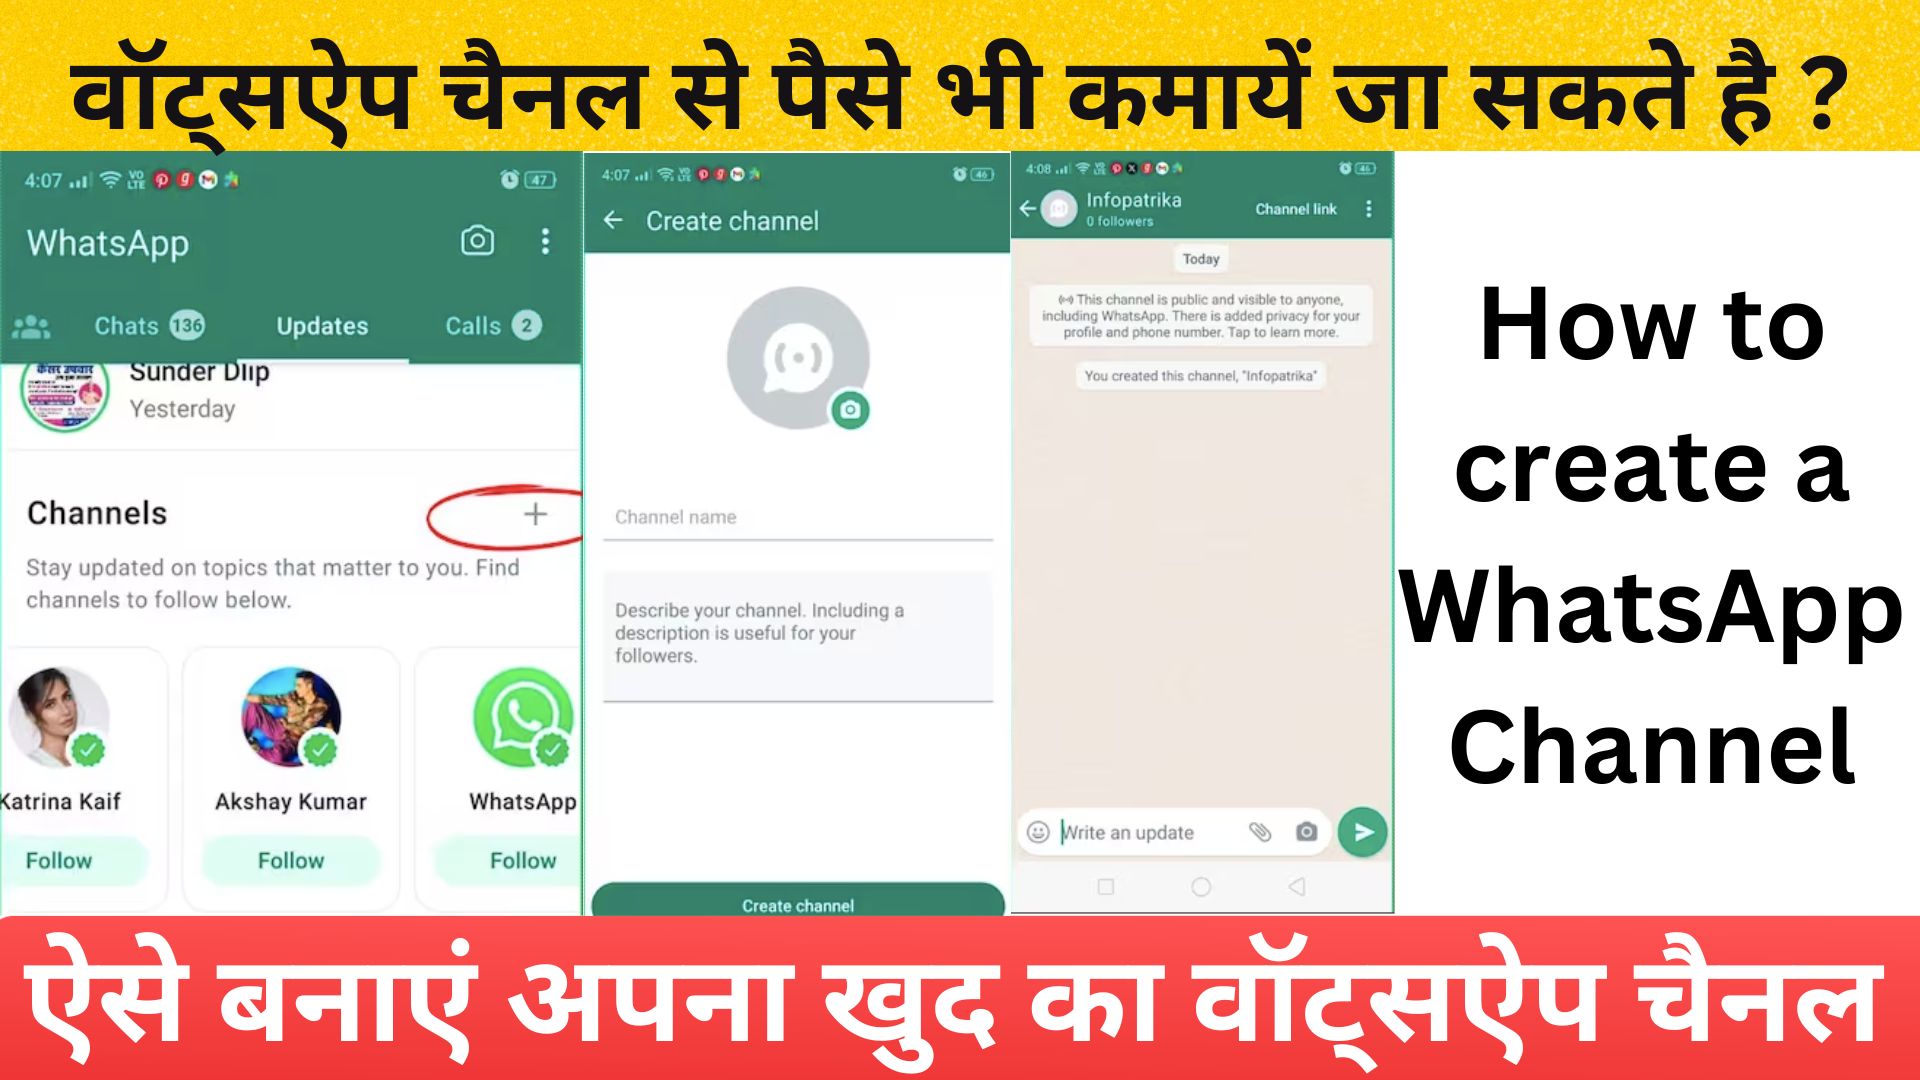 How to create a WhatsApp Channel